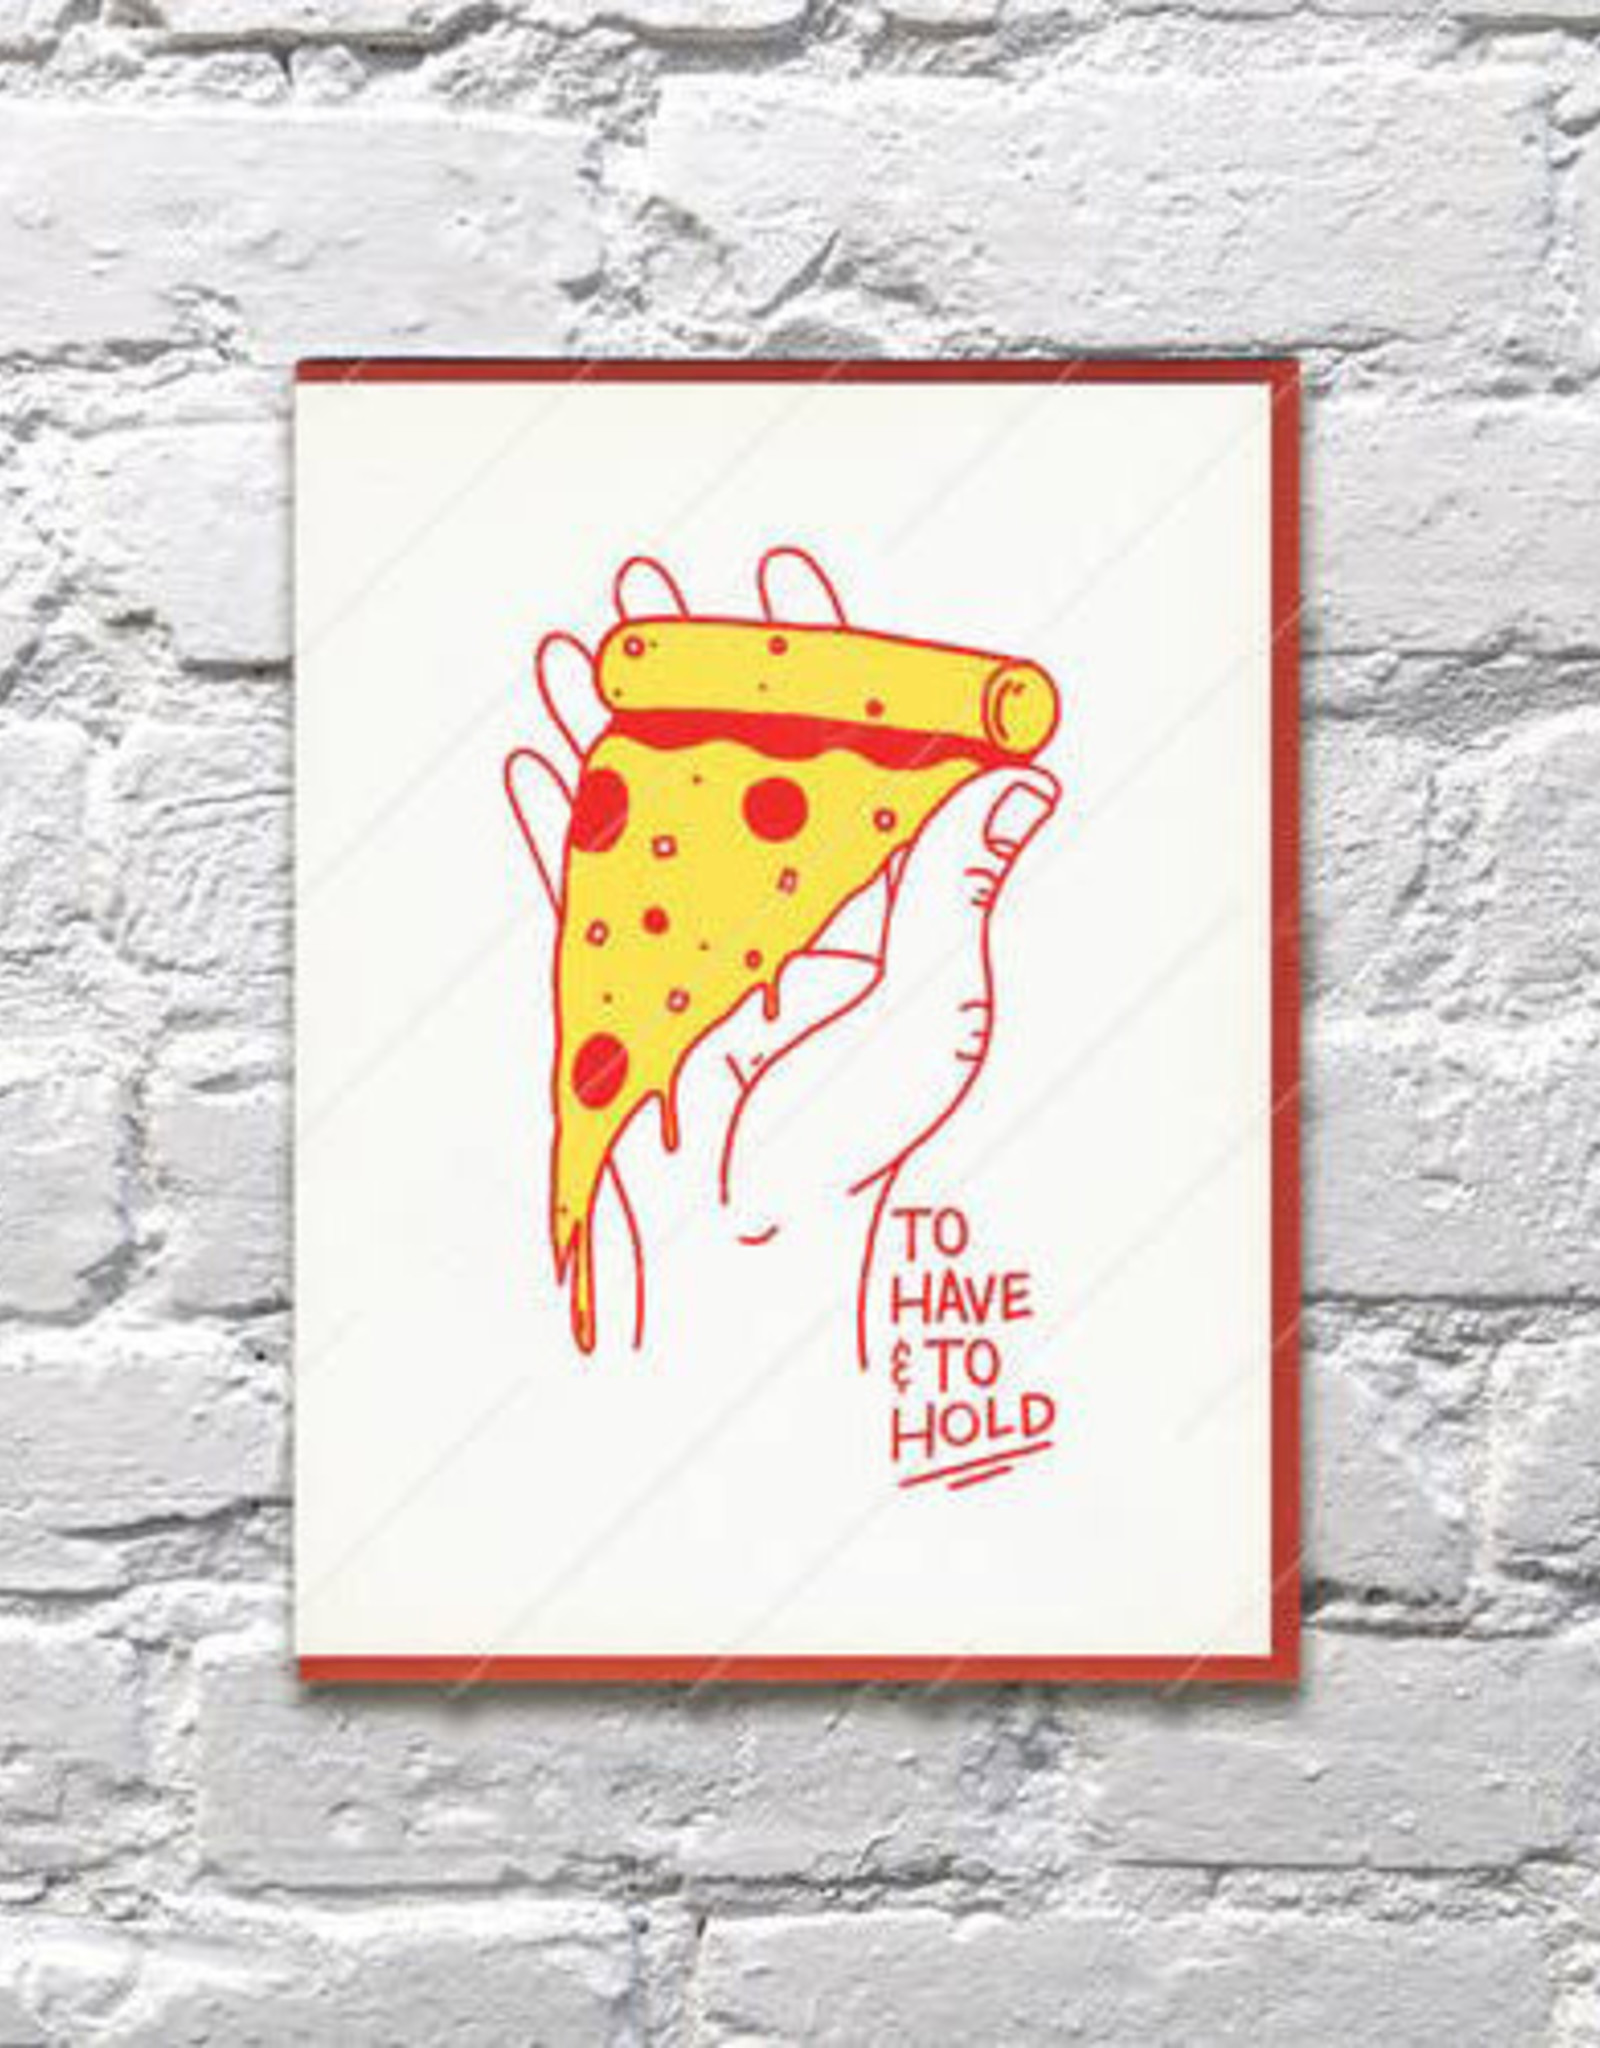 Bench Pressed Have & Hold Pizza Card